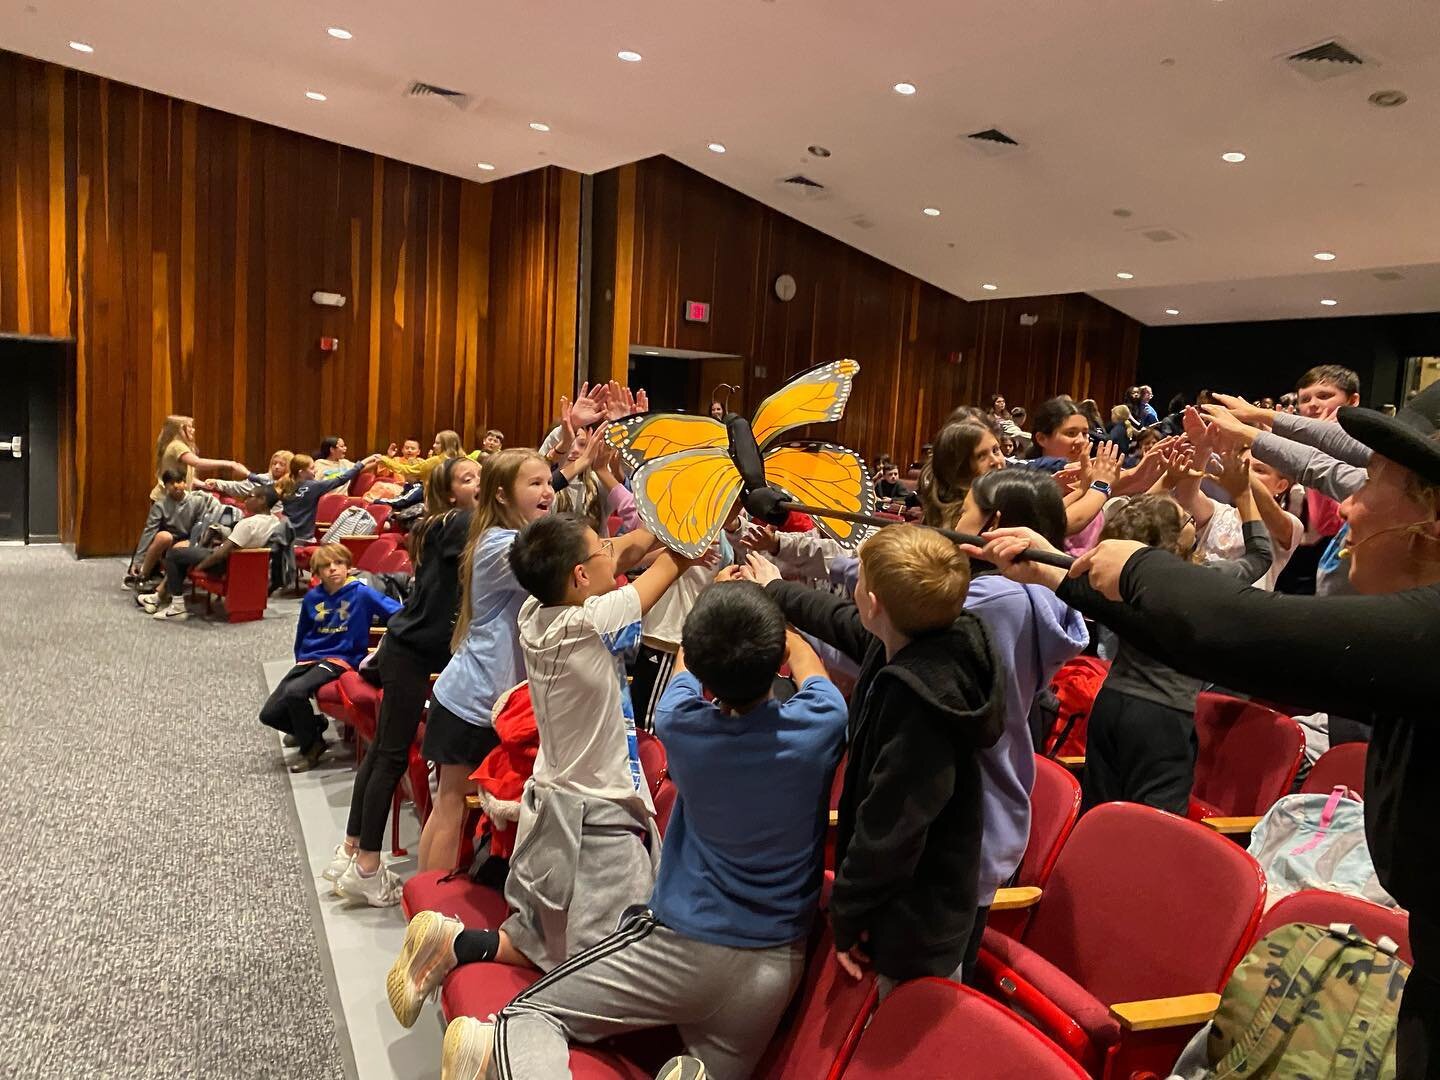 Today is Giving Tuesday, so we are sharing images from a recent performance in a CT school allowing students to find joy in live shared arts experiences.  The power of the imagination can lead to innovation and progress through independent thinking, 